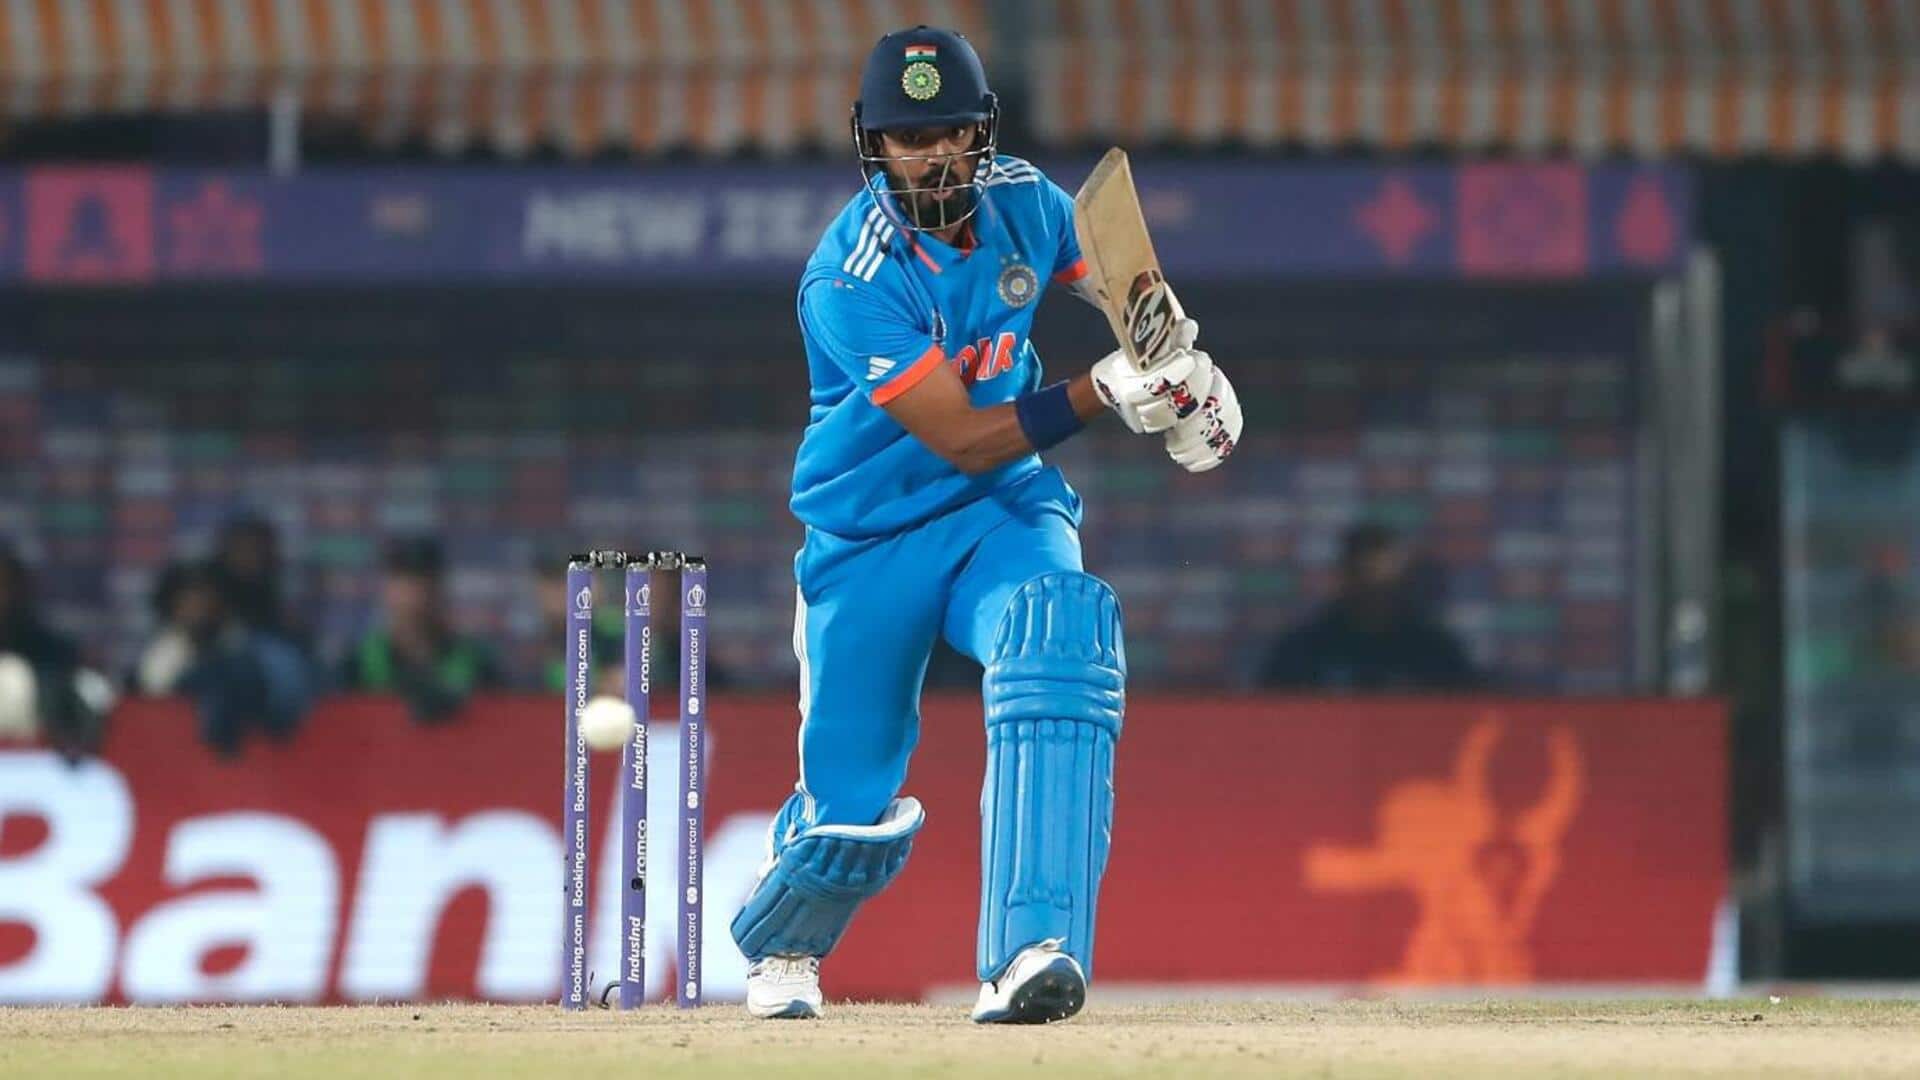 World Cup: KL Rahul completes 1,500 ODI runs in Asia